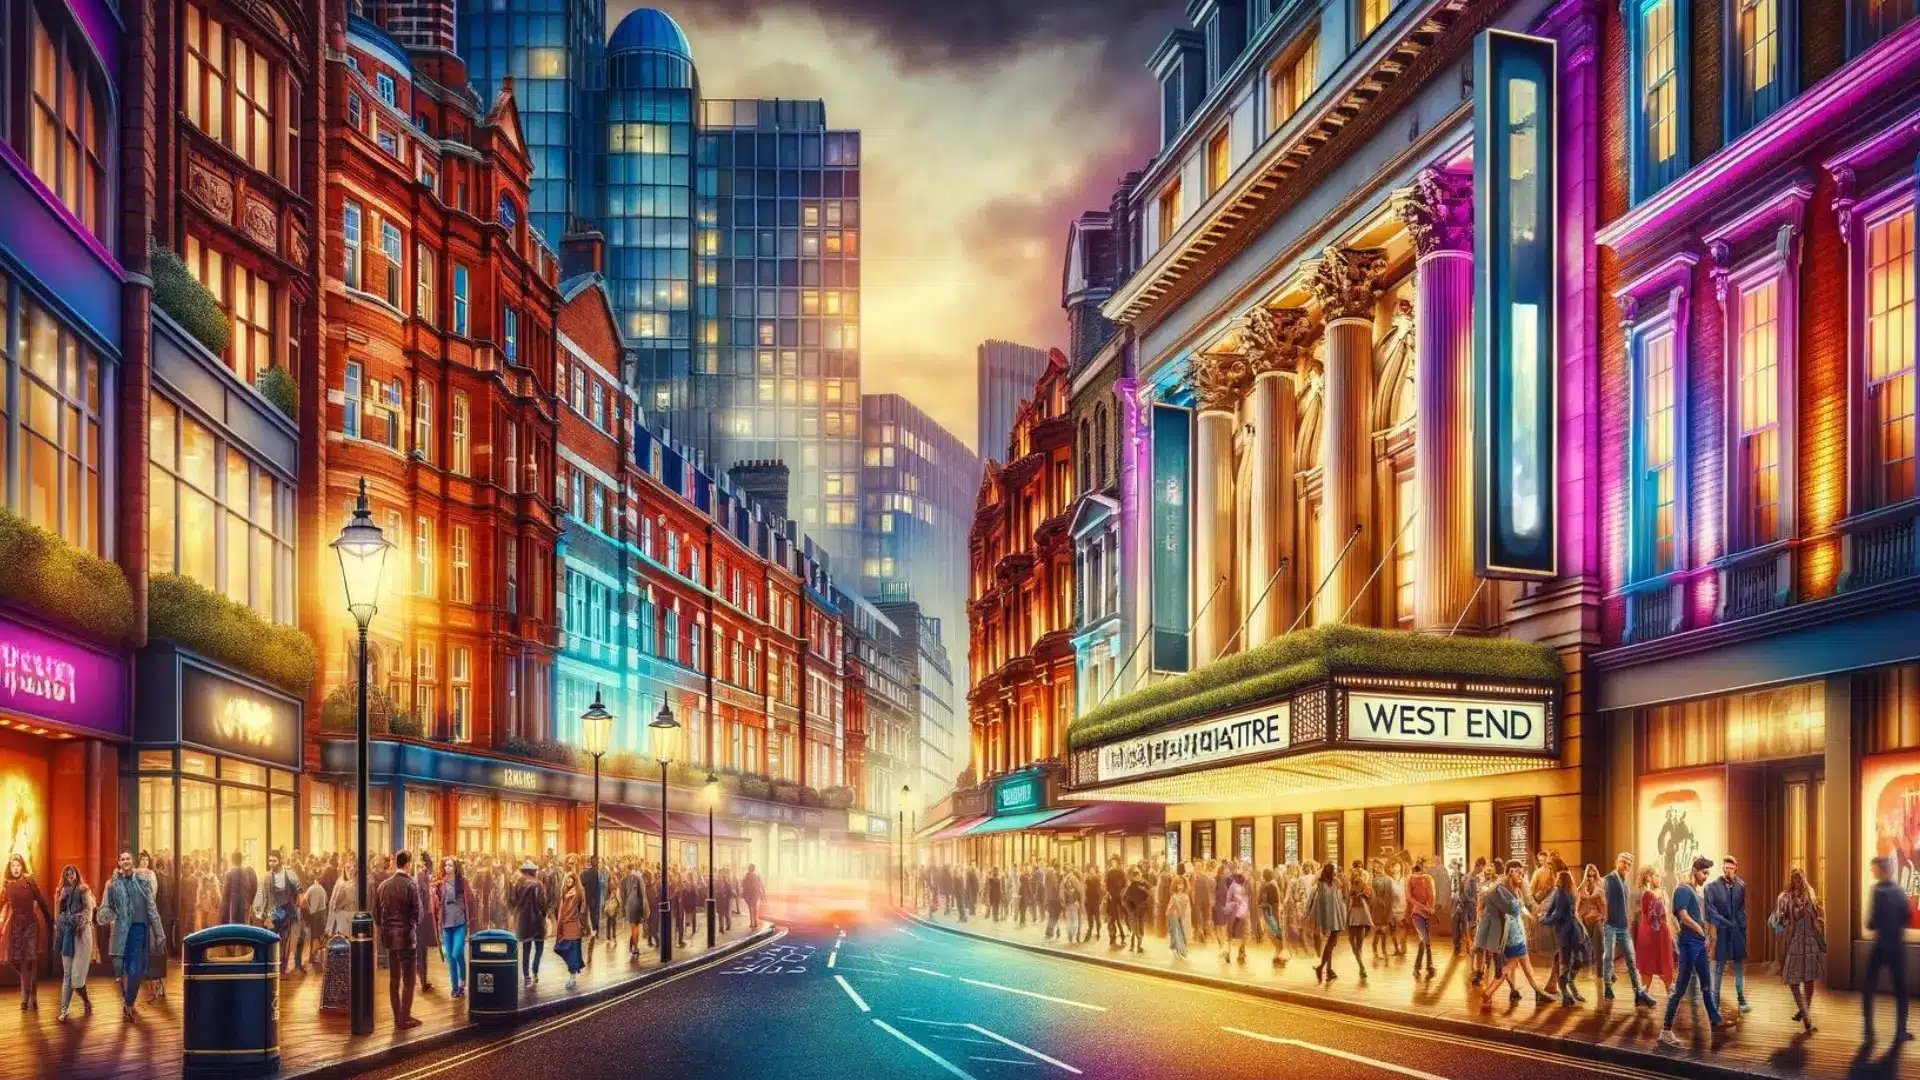 Vibrant West End street in London with illuminated theatres and a bustling crowd at dusk.